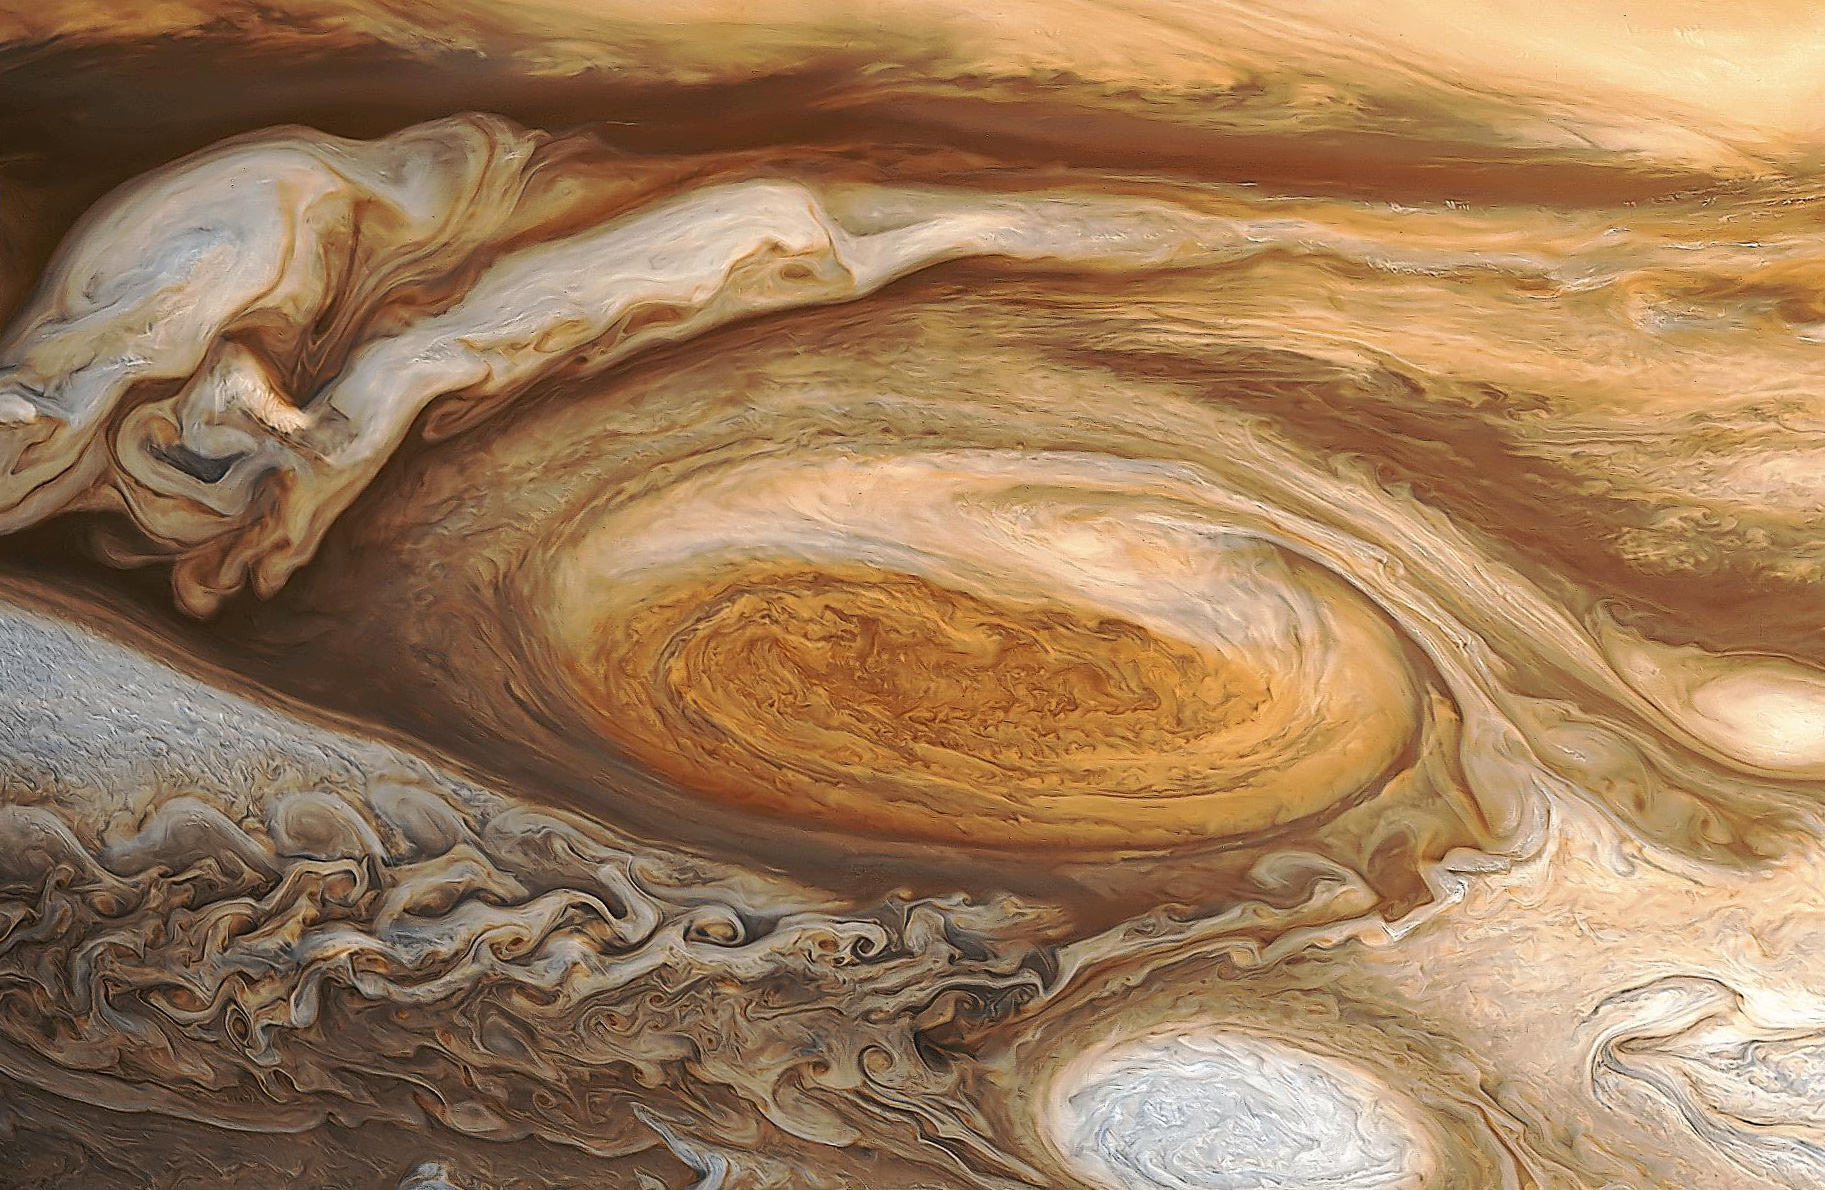 Will Jupiter's Great Red Spot Turn into a Wee Red Dot ...